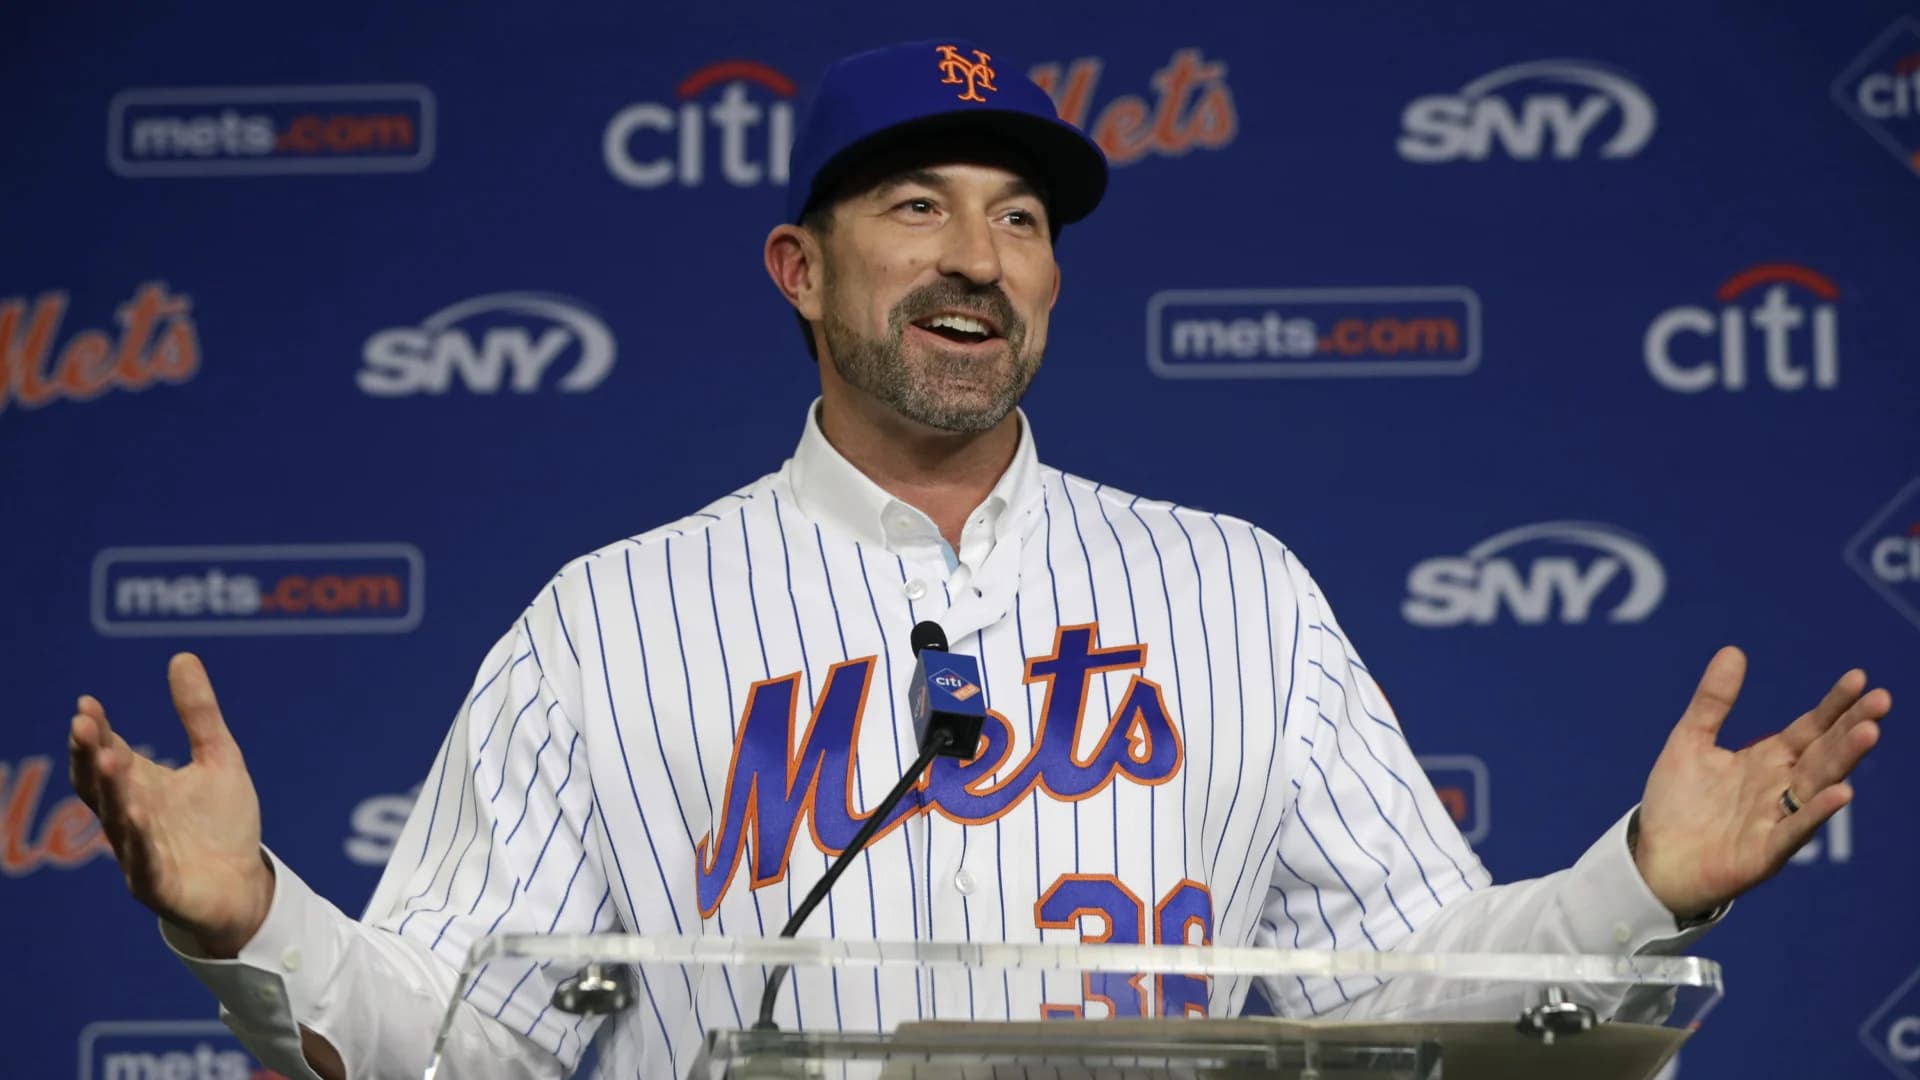 The Athletic report: Former Mets manager Mickey Callaway accused of 'lewd behavior'